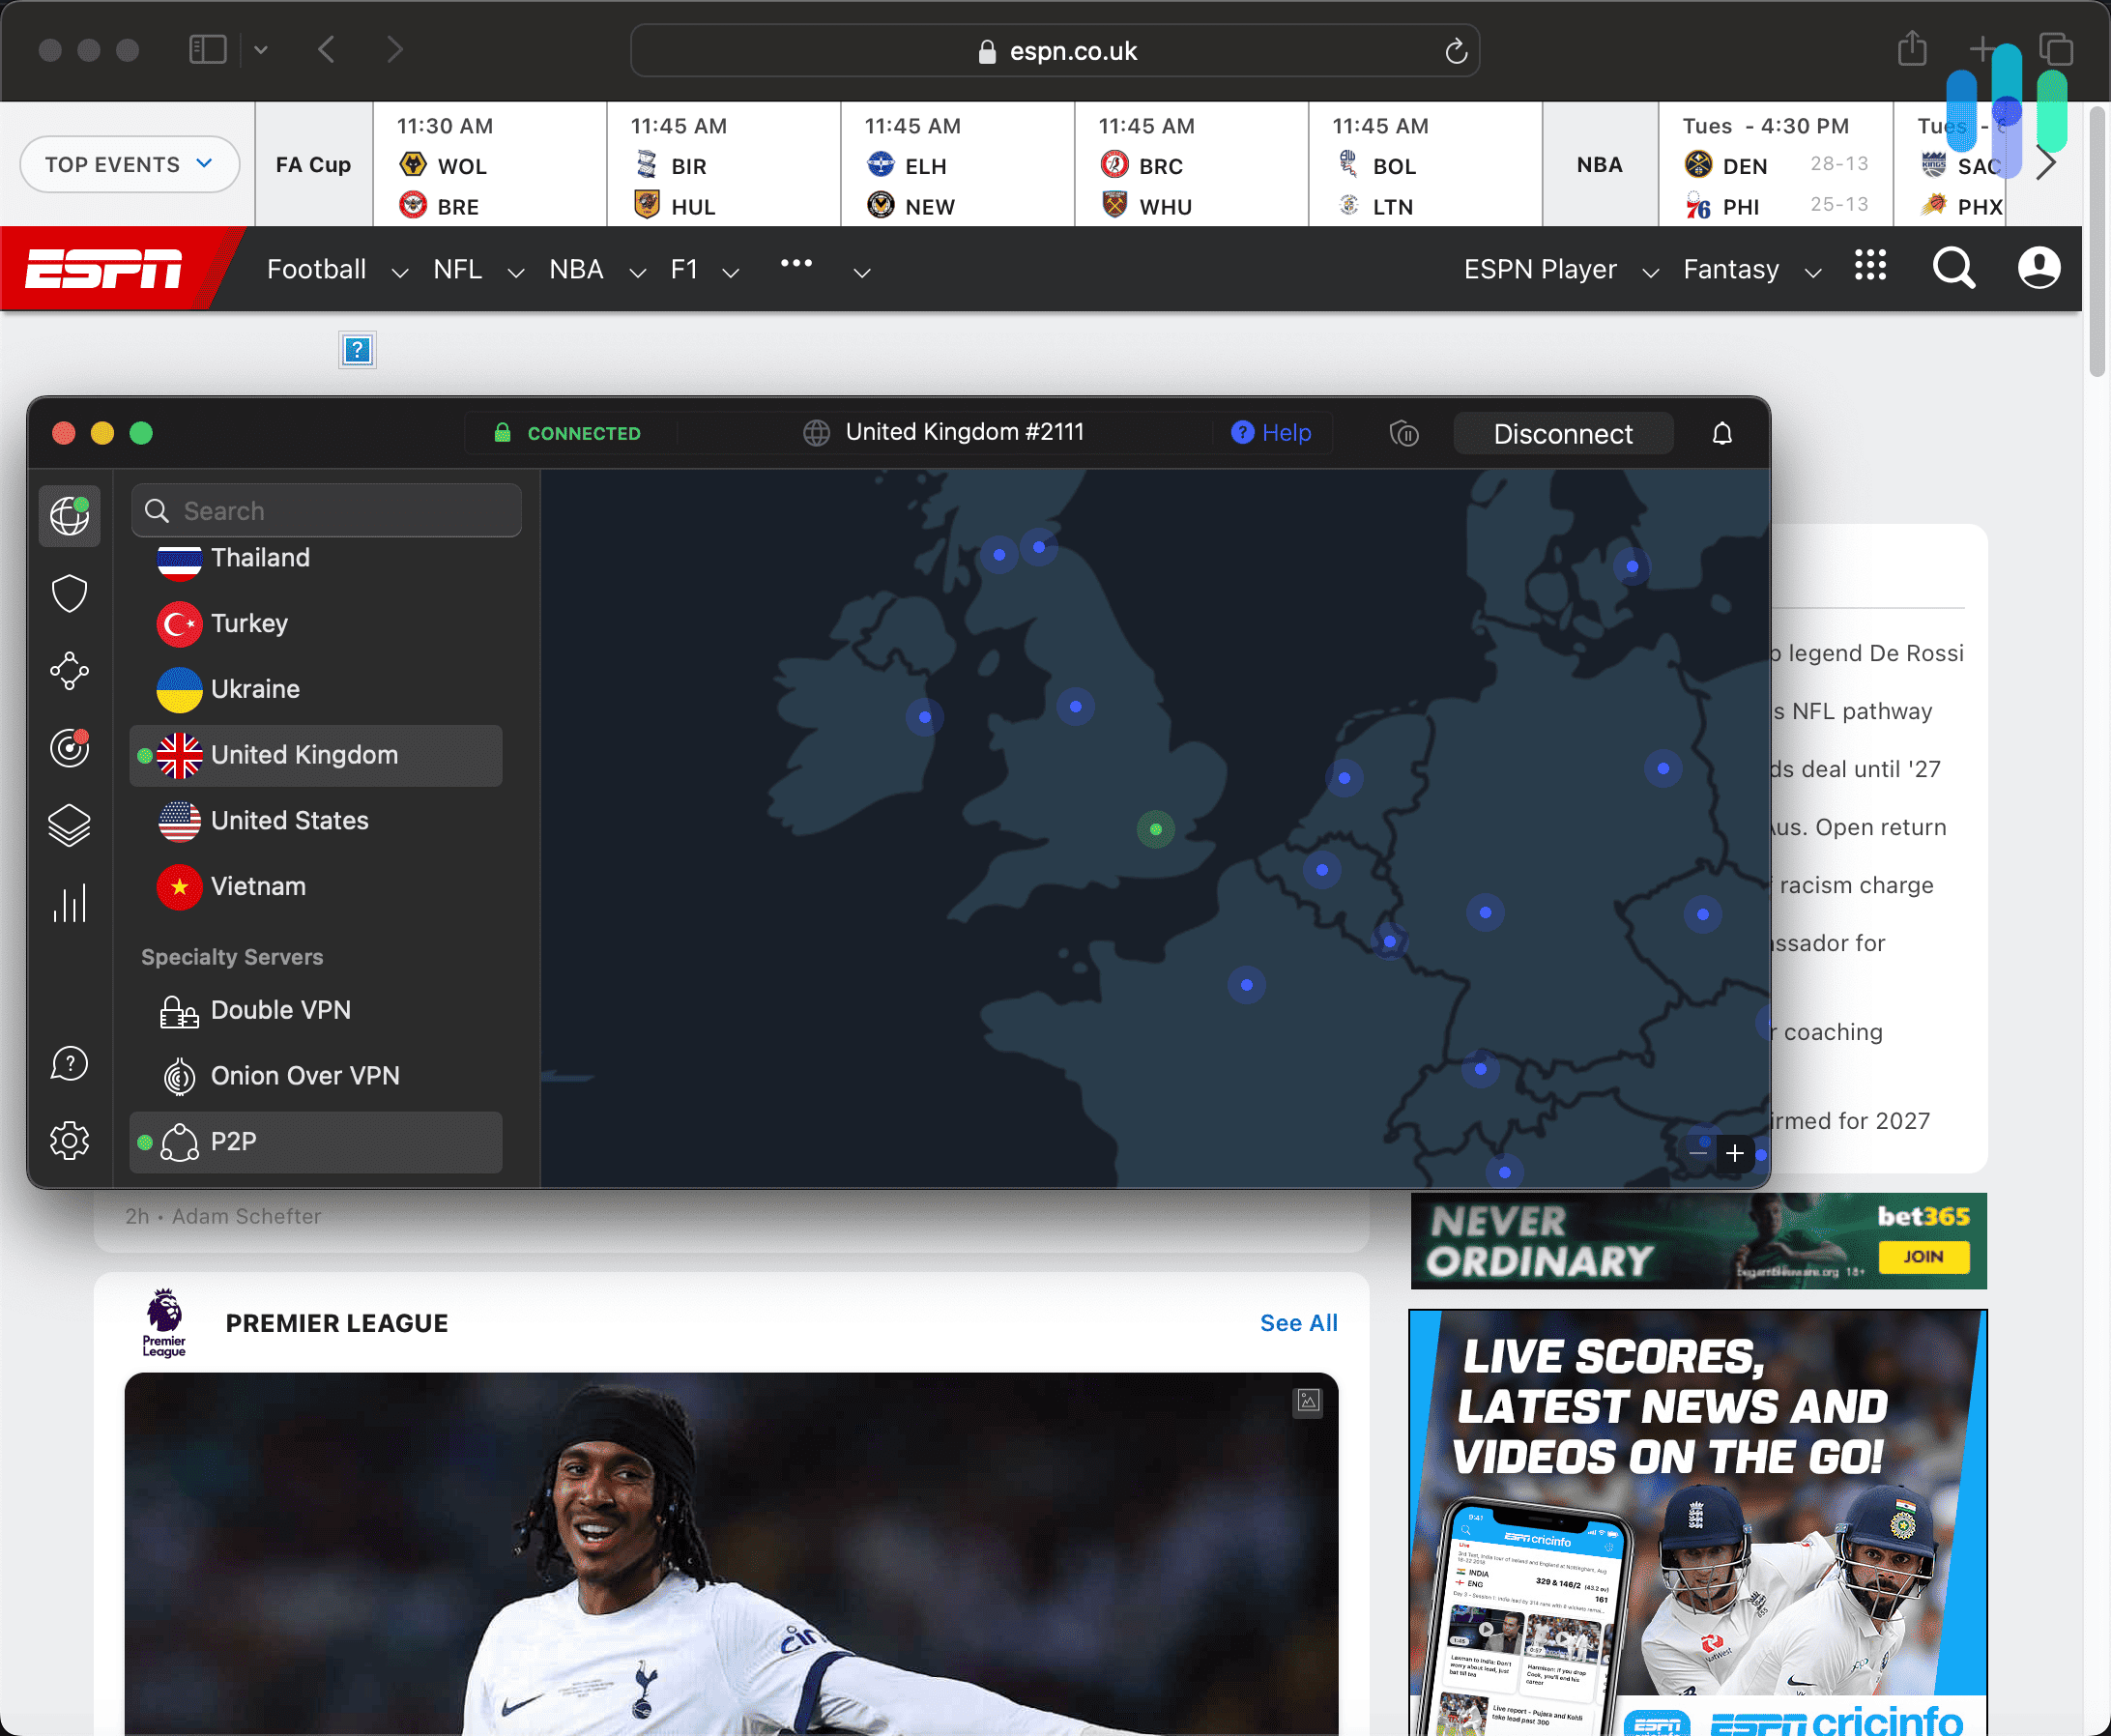 Using NordVPN on a UK server and browsing ESPN UK content with Safari